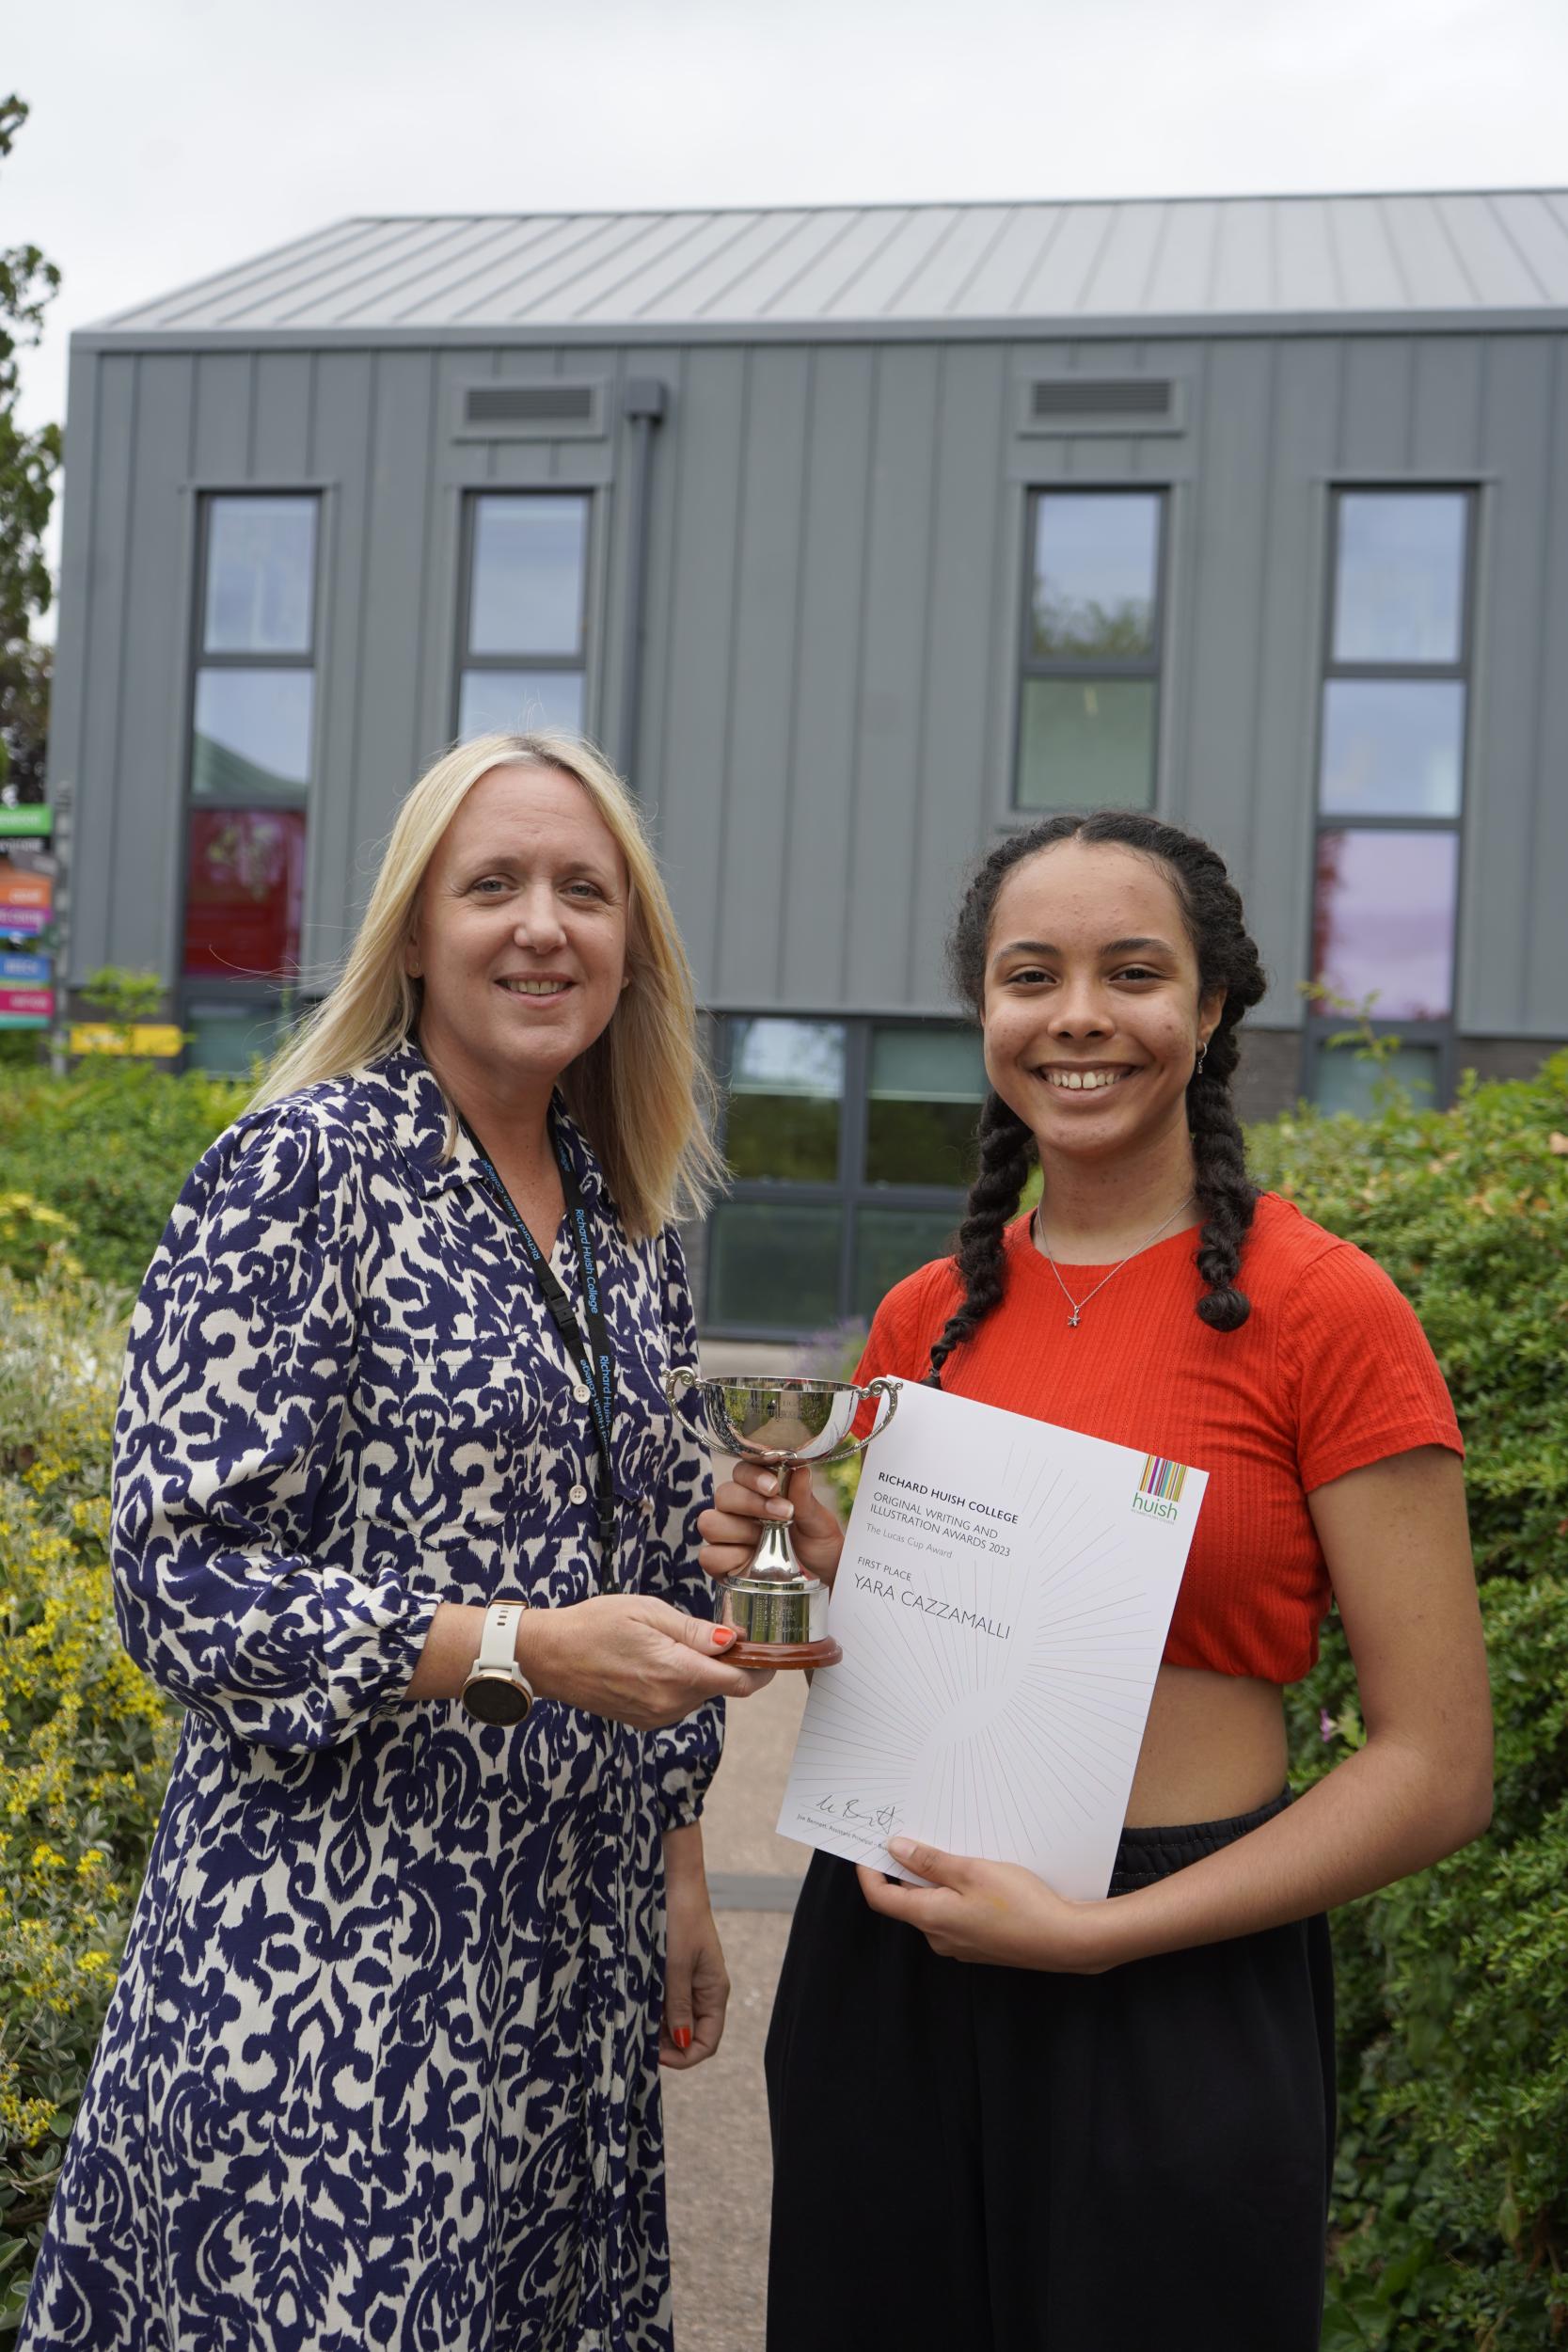 Yara Cazzamalli collecting certificate and trophy from Becky Flower